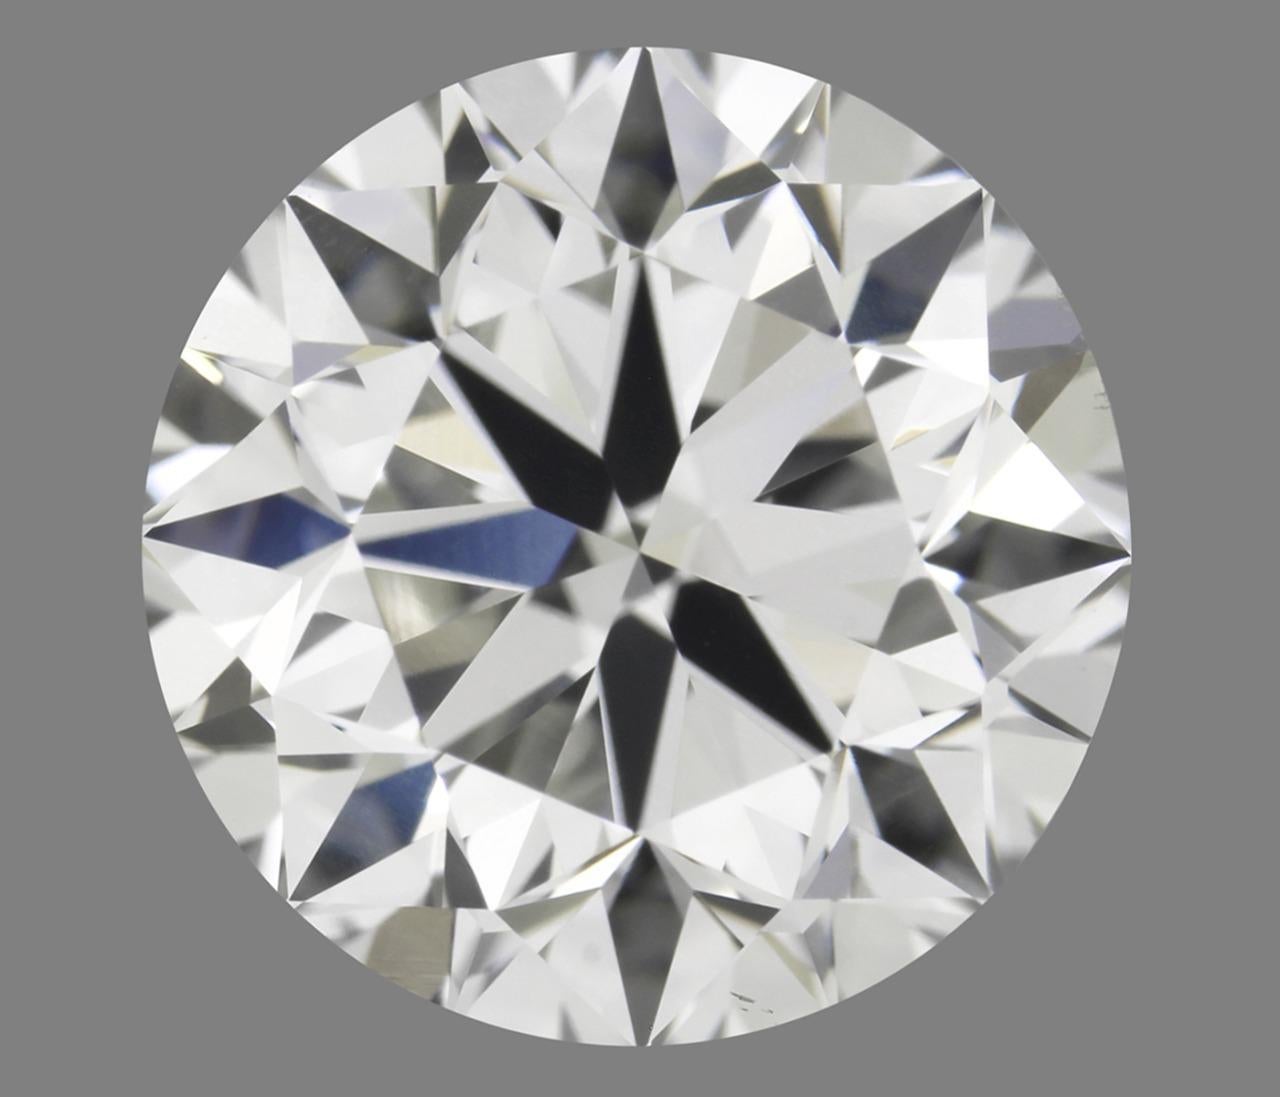 GIA Certified 0.50 Carat, D/IF, Brilliant Cut, Excellent Natural Diamond

Perfect Brilliants for perfect gifts.

5 C's:
Certificate: GIA
Carat: 0.50ct
Color: D
Clarity: IF(Internally Flawless)
Cut: Excellent

Polish: Excellent
Symmetry: